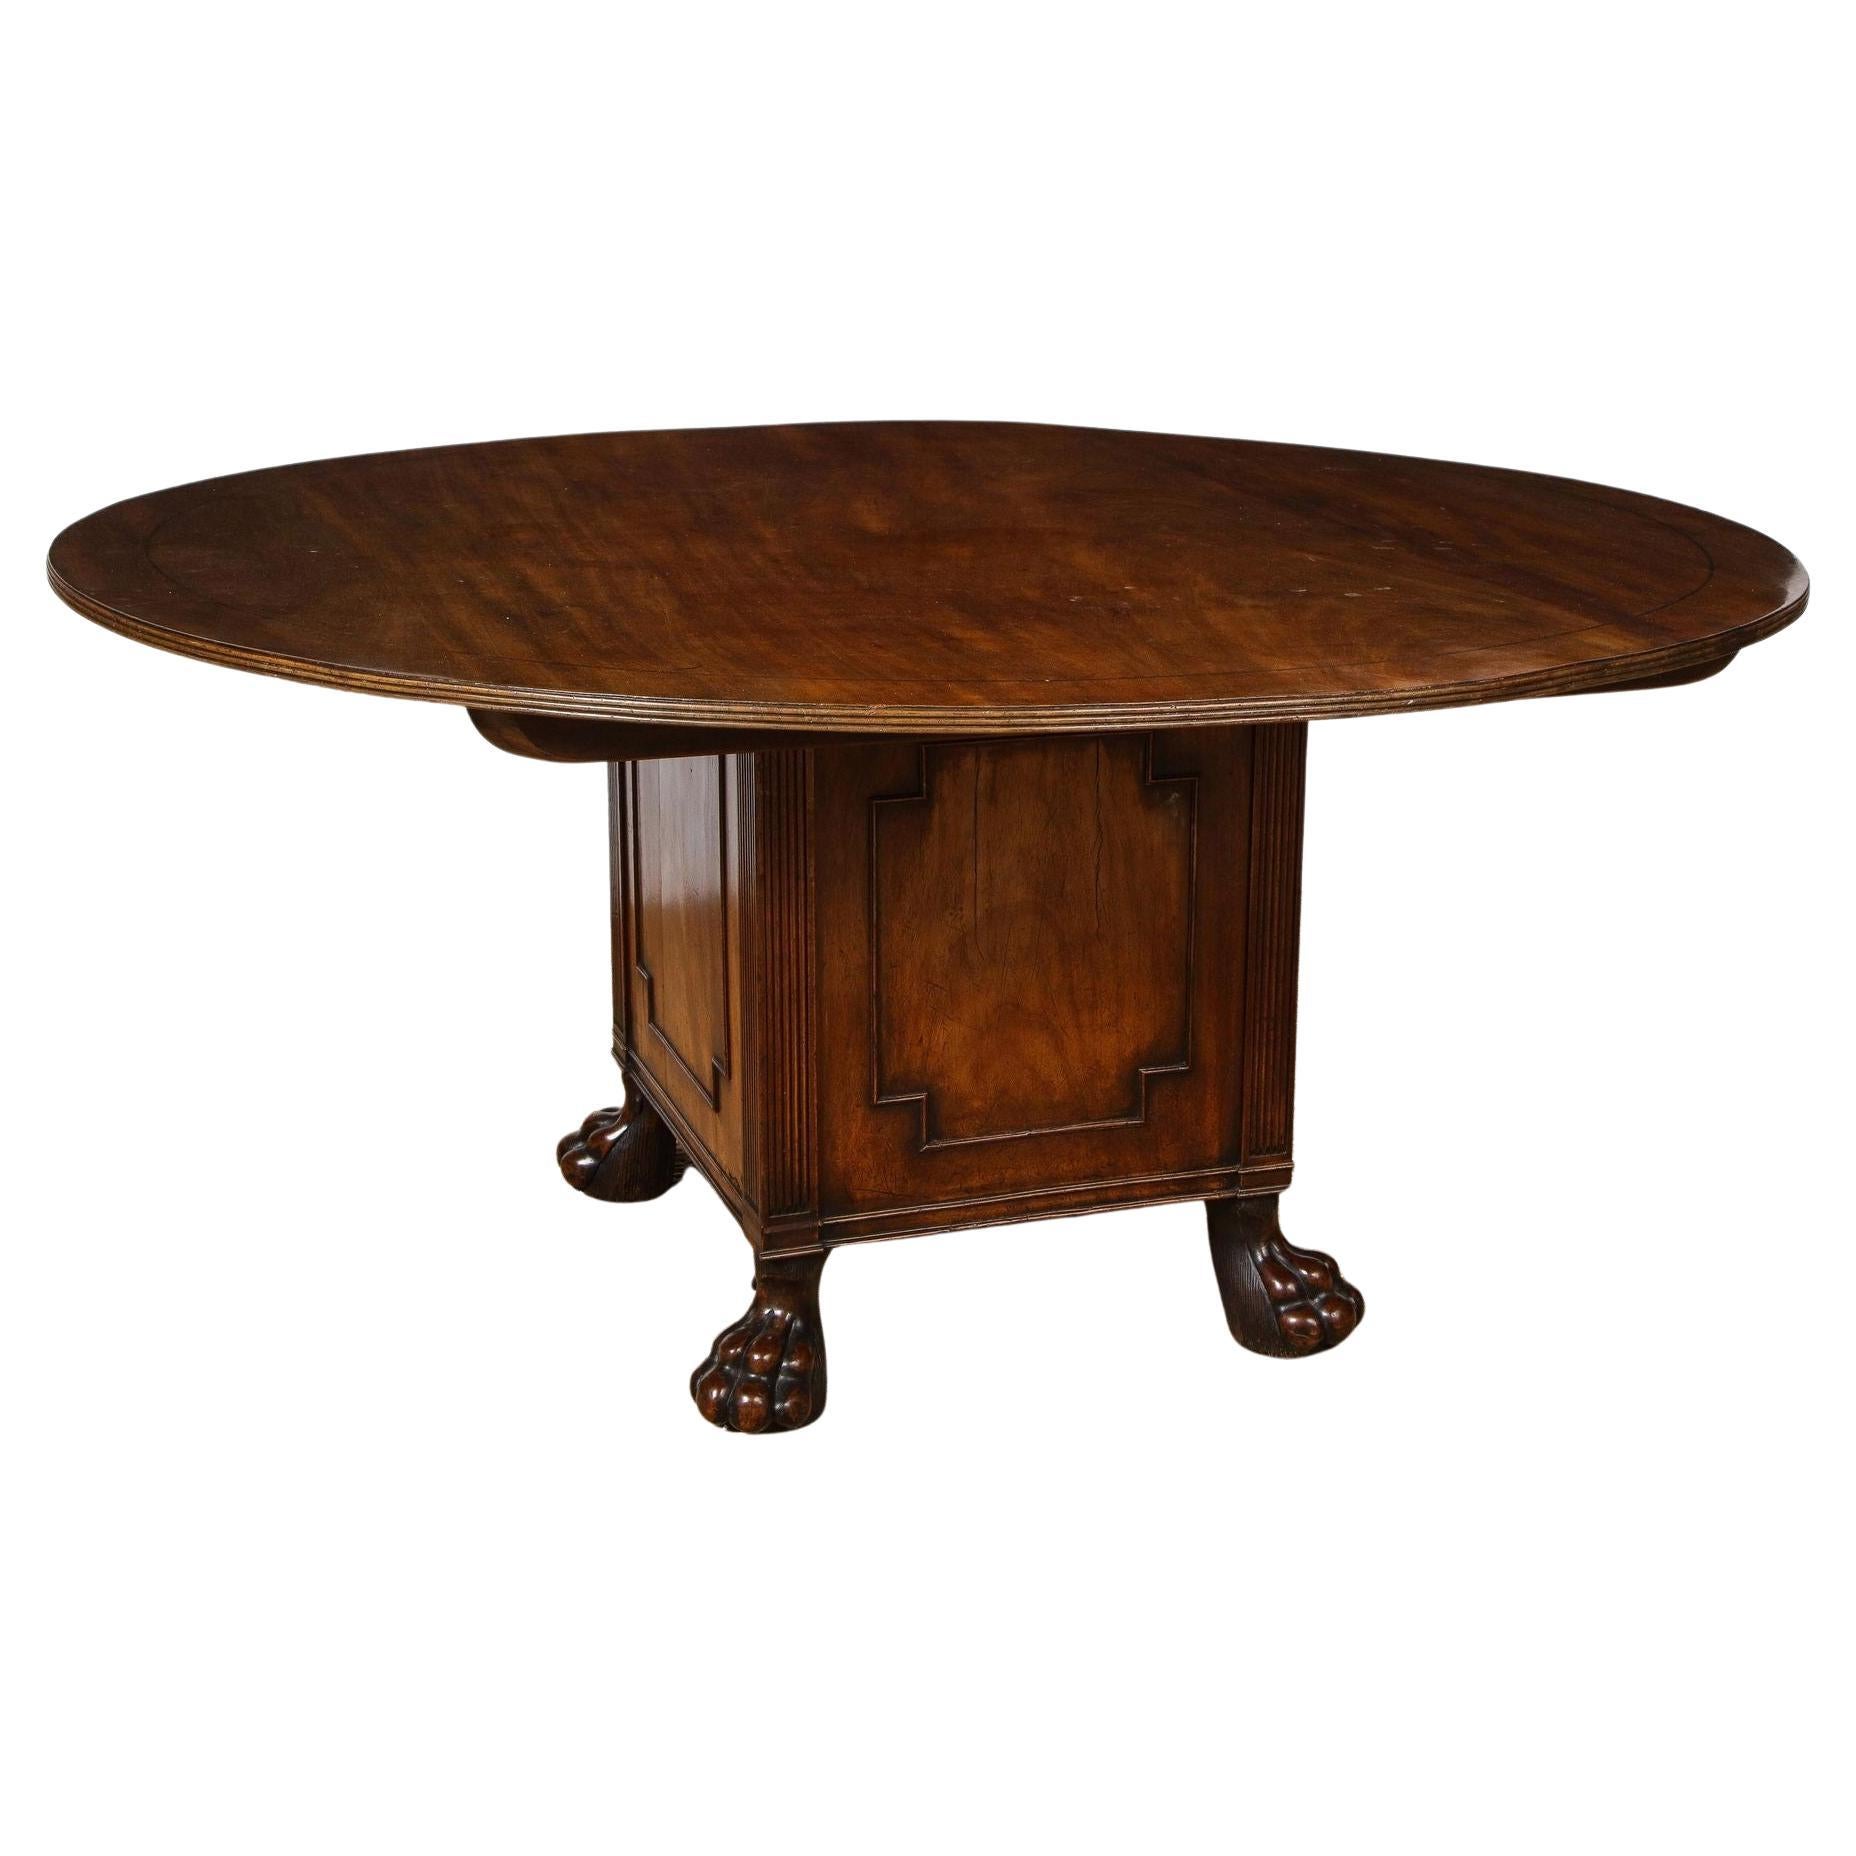 Rare Early 19th century Regency Dining Table For Sale